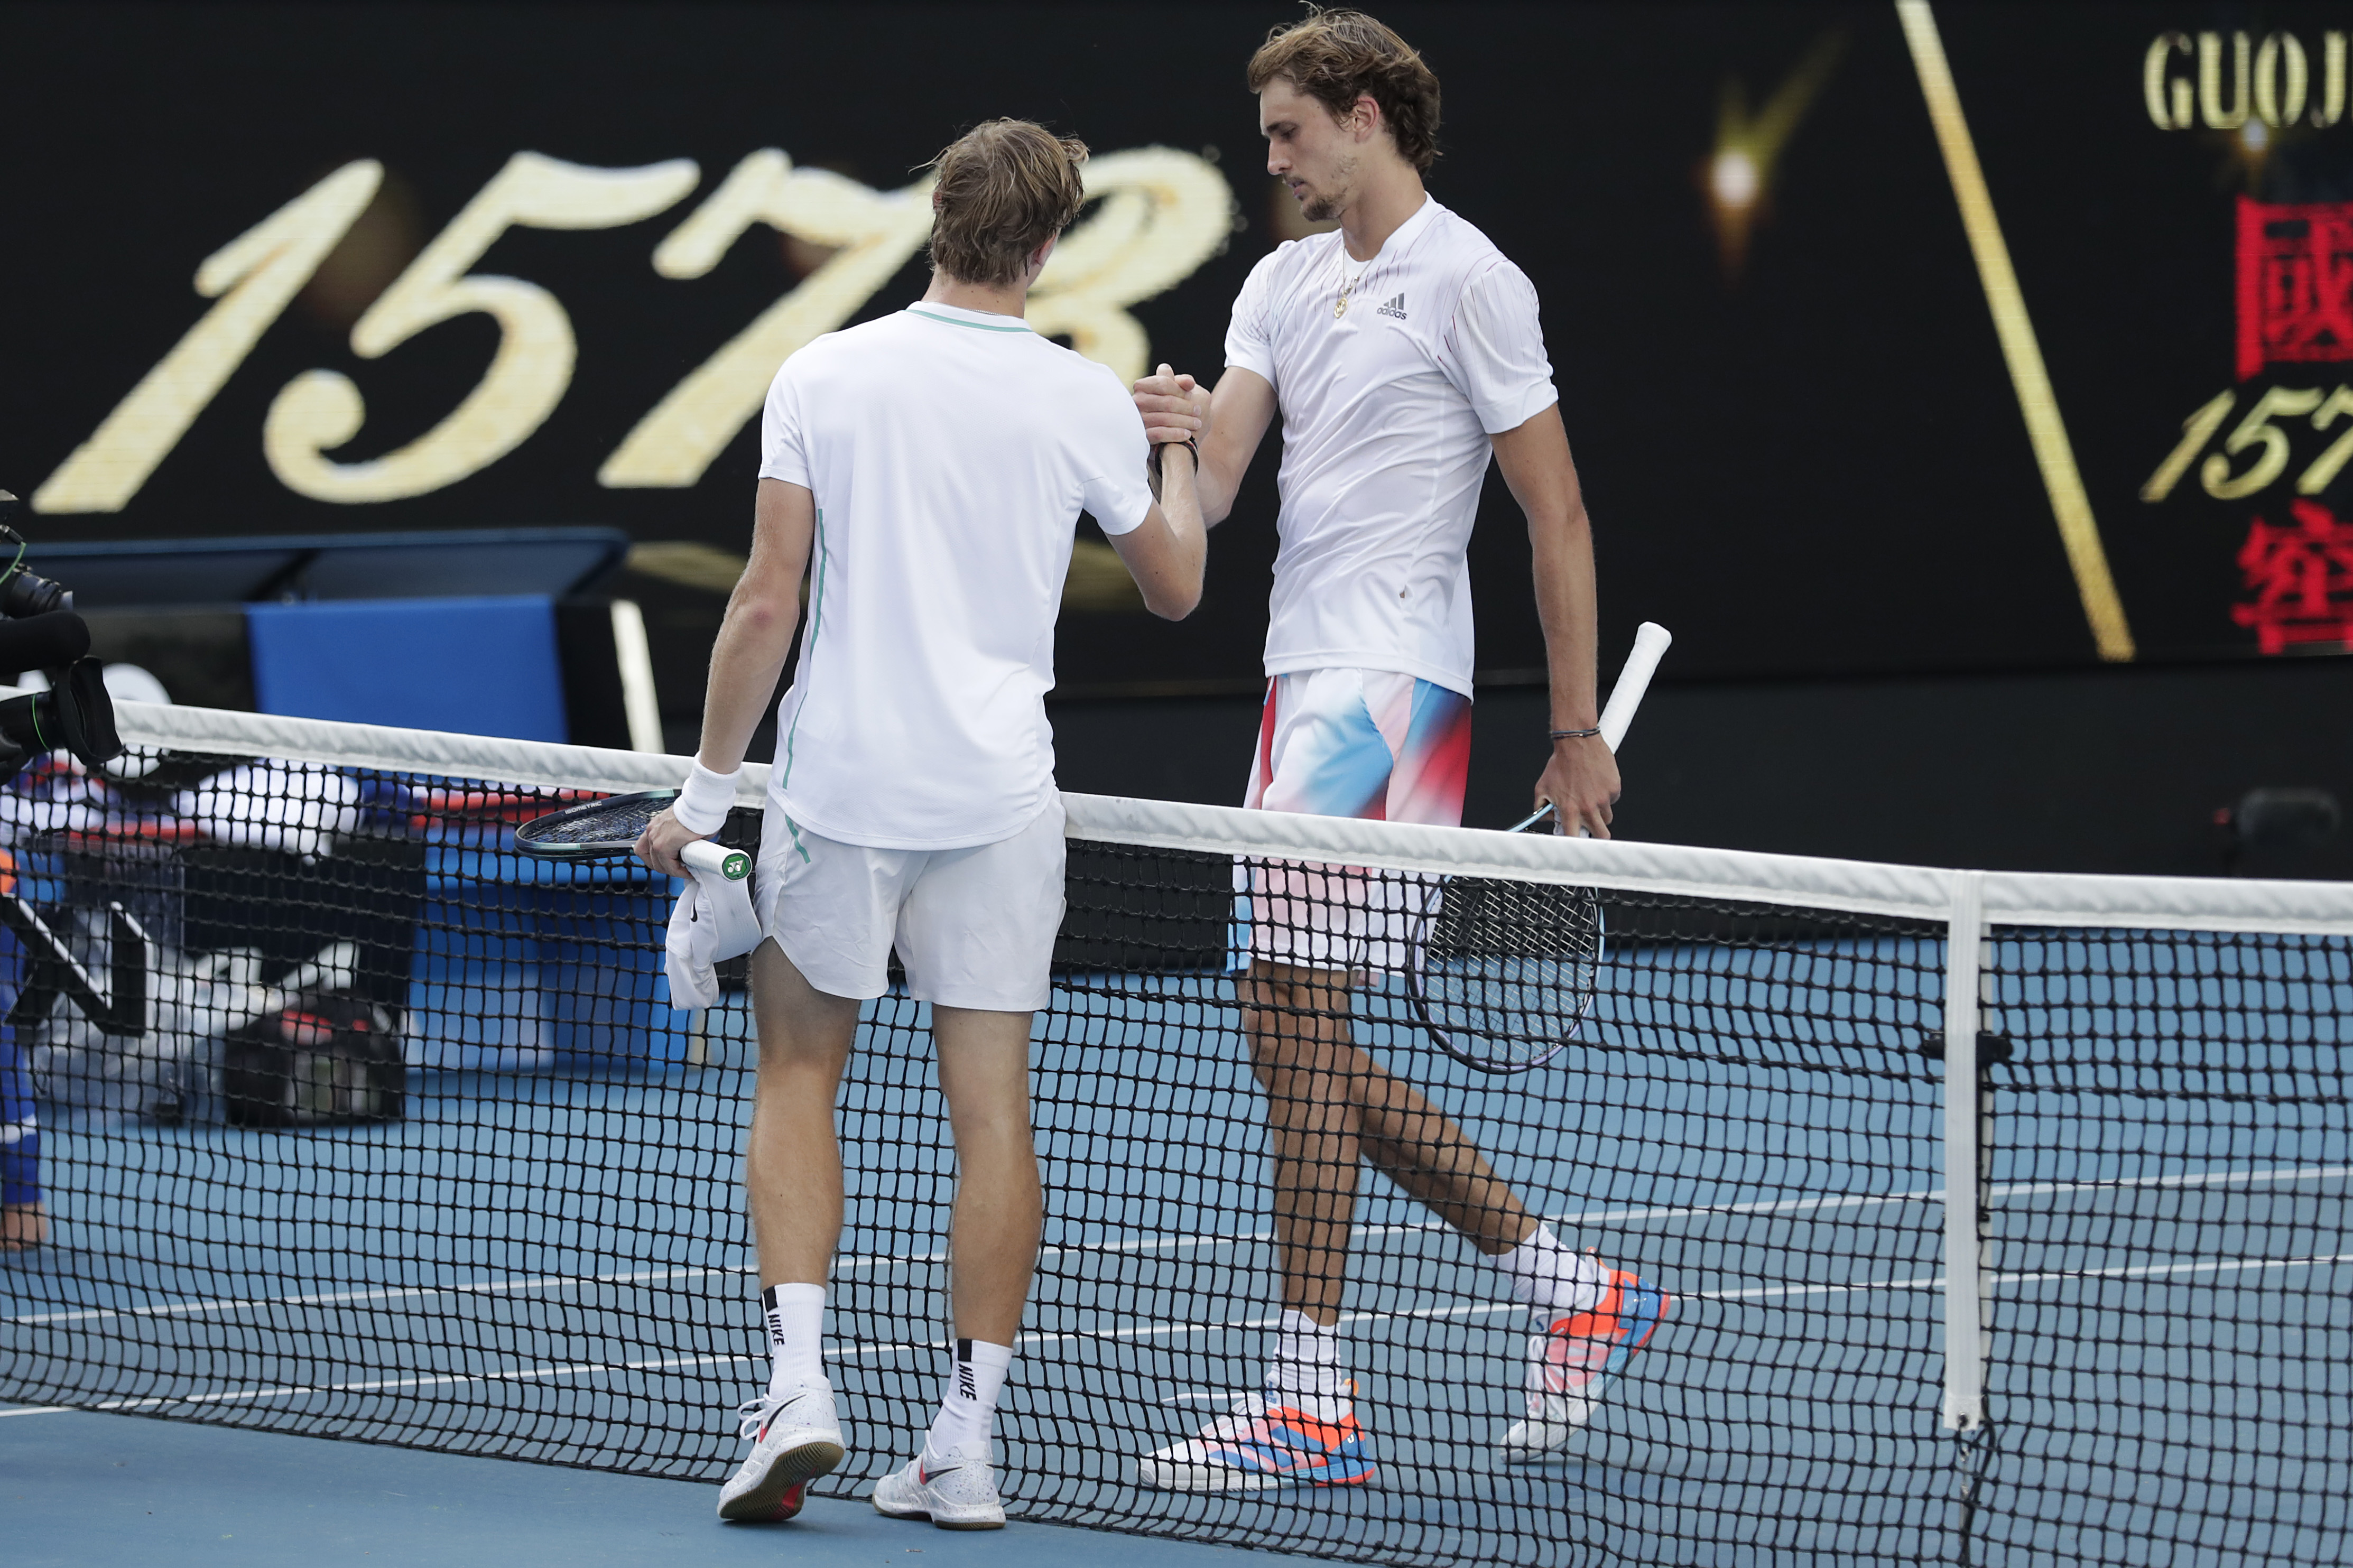 Denis Shapovalov of Canada shakes hands with Alexander Zverev (R) of Germany after winning in his fourth round singles match during day seven of the 2022 Australian Open at Melbourne Park on January 23, 2022 in Melbourne, Australia.